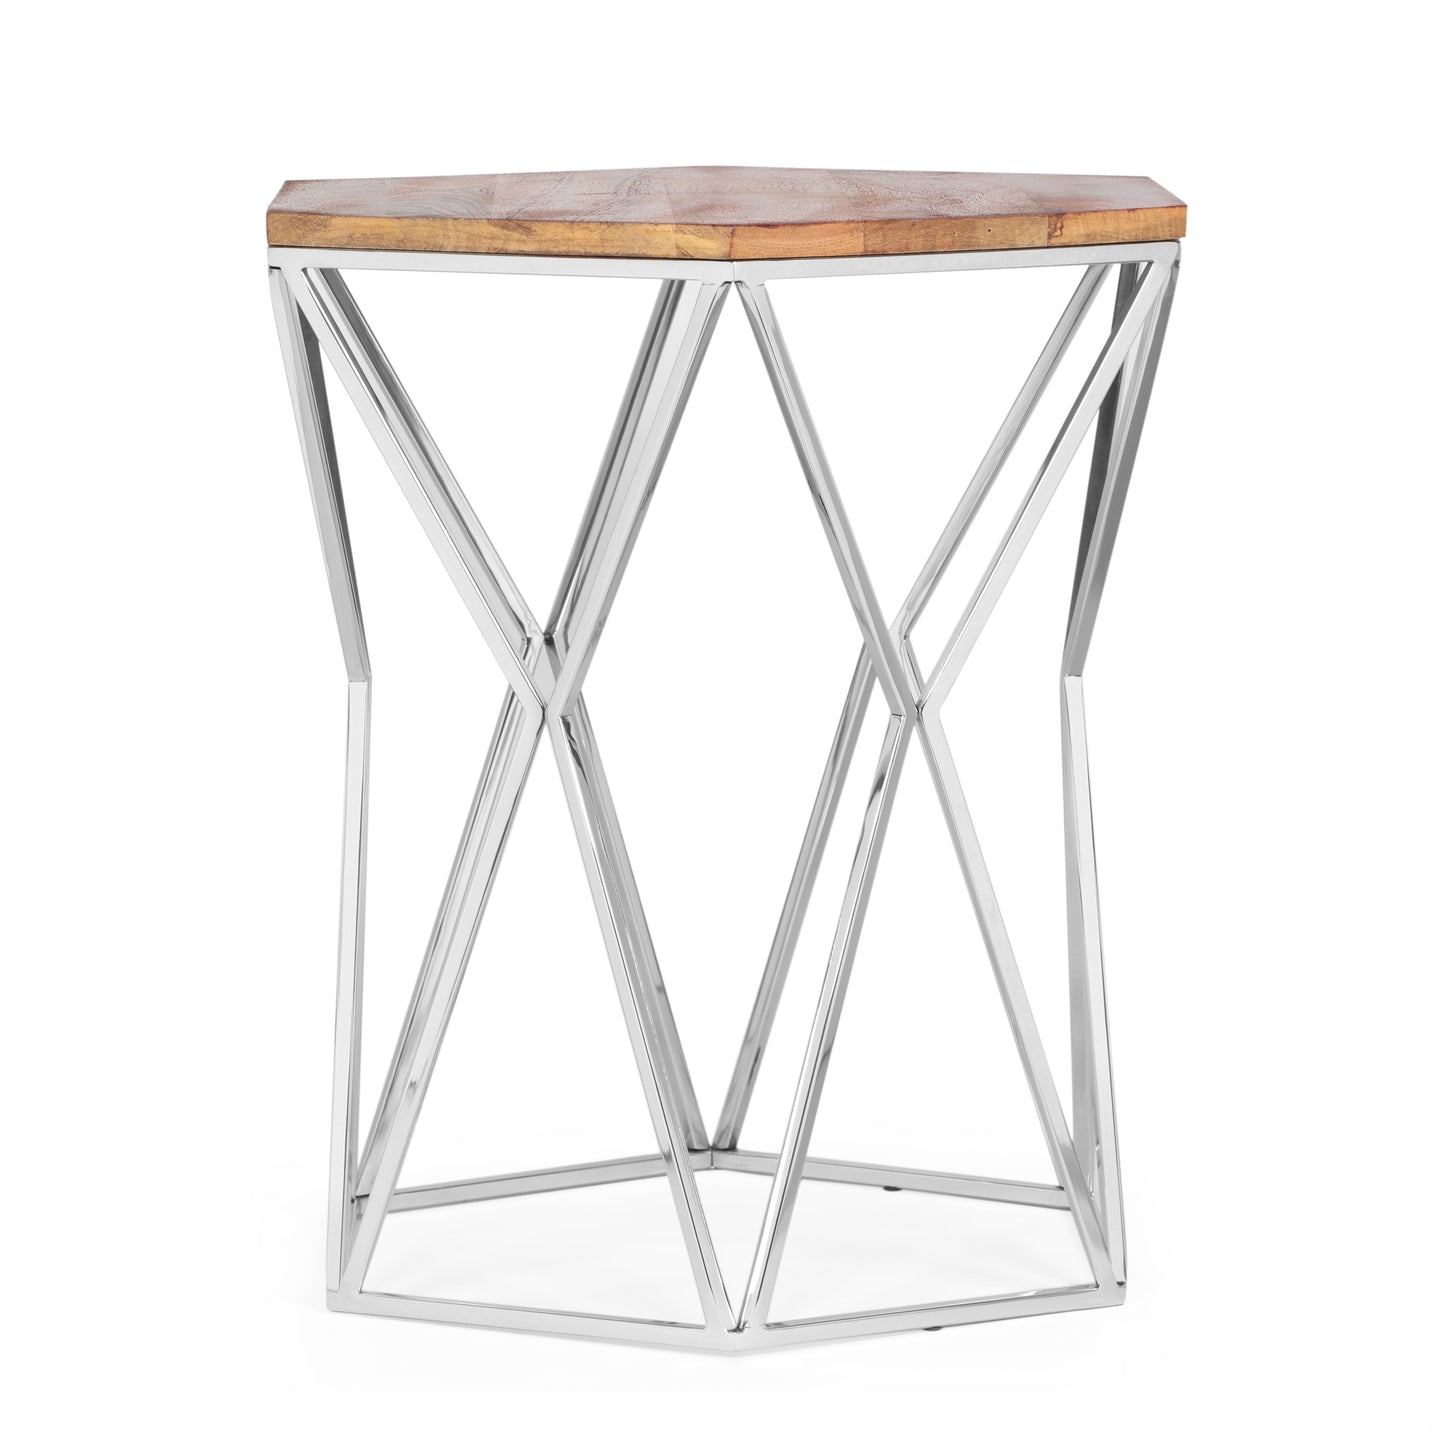 Bellion Rustic Glam Handcrafted Mango Wood Side Table, Walnut and Polished Nickel